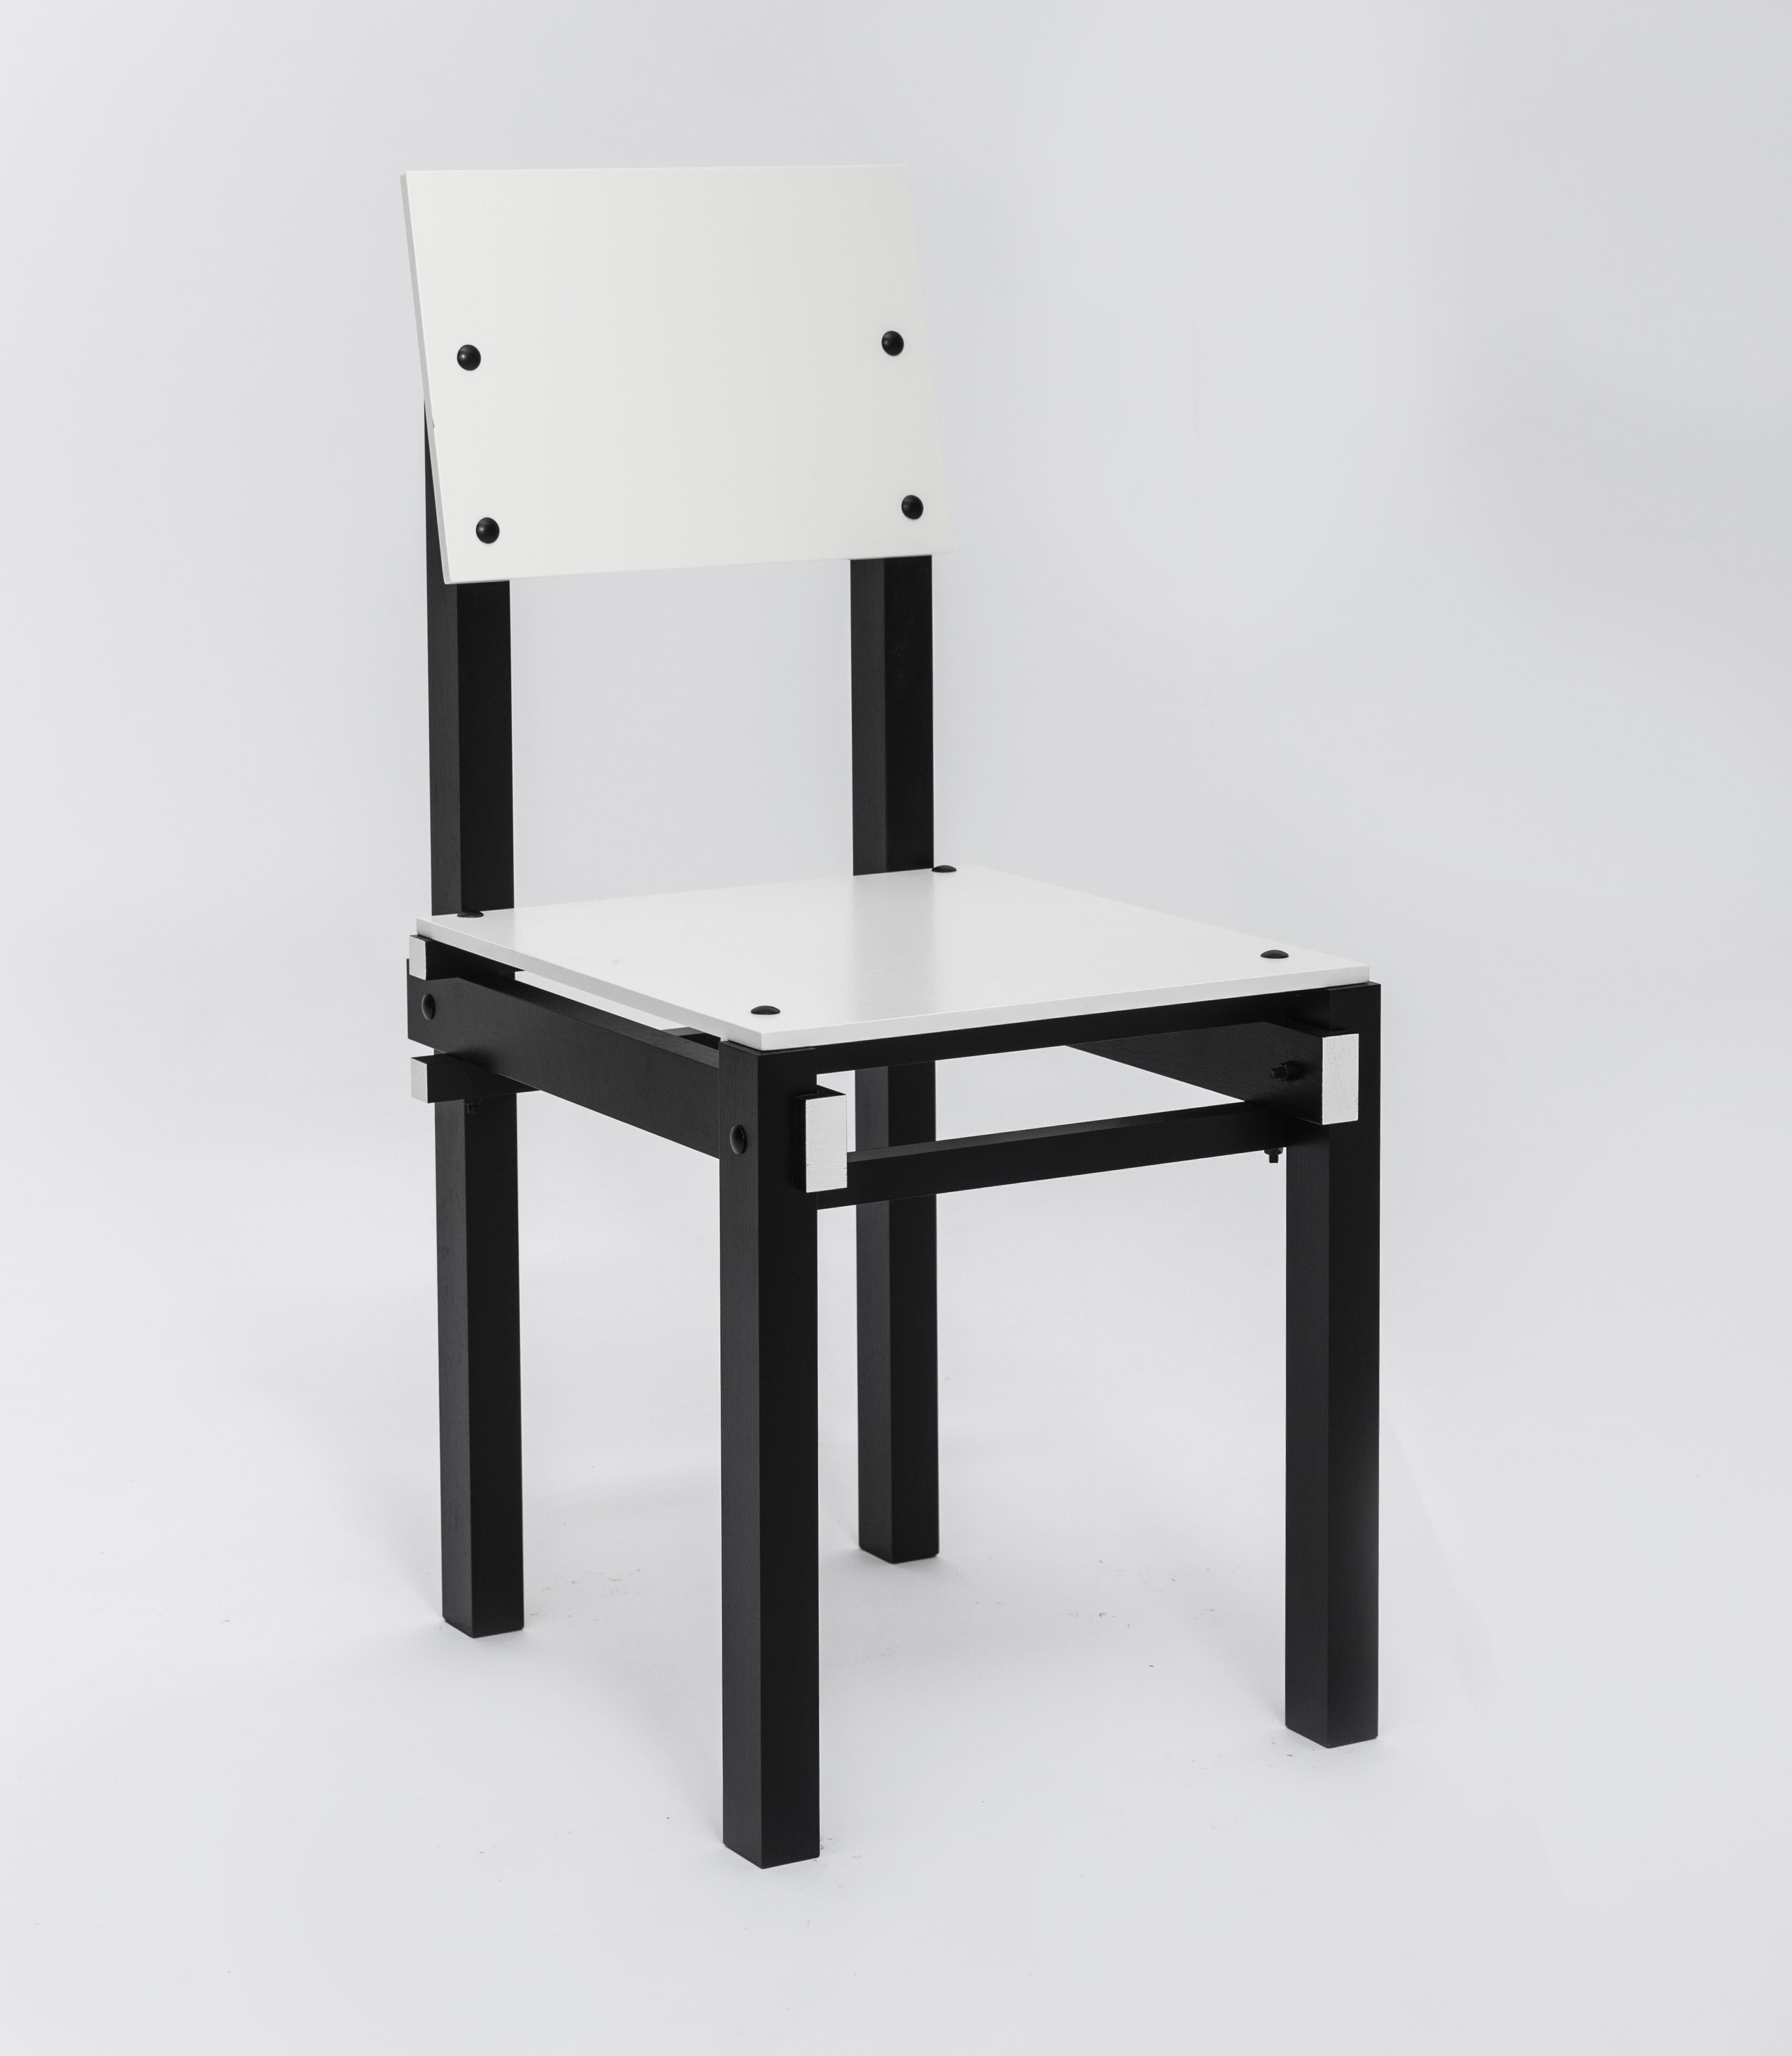 Chair

The Rietveld Military furniture was designed in 1923 by Gerrit Rietveld for a Catholic Military home in Utrecht, the Netherlands. The Military series was the first to use nuts and bolts instead of wooden dowels. The military furniture was